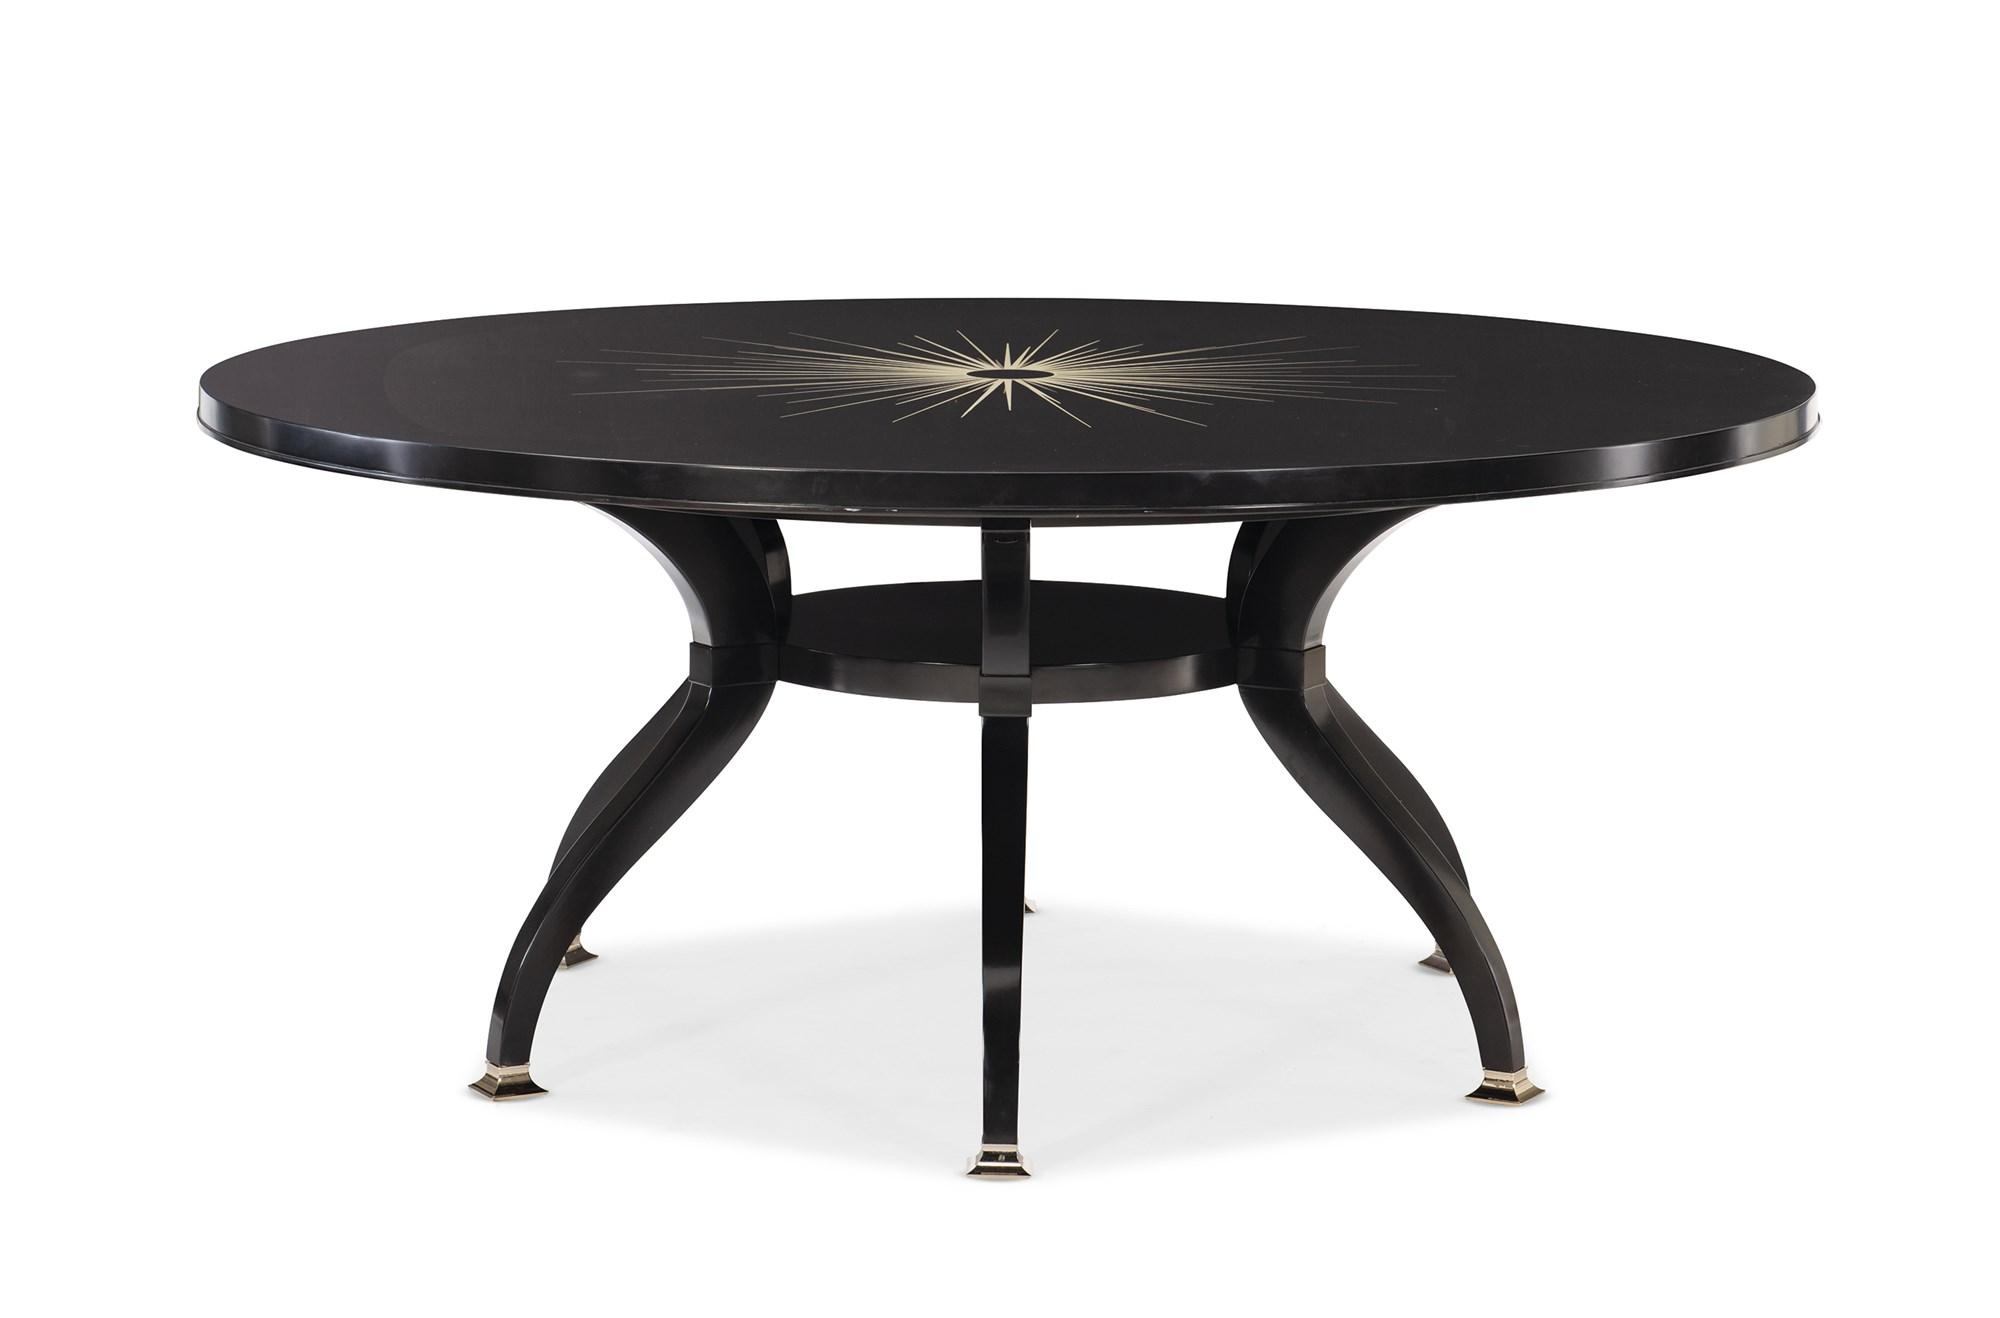 

    
Satin Ebony Silkscreened Starburst Pattern Dining Table TOTAL ECLIPSE by Caracole
